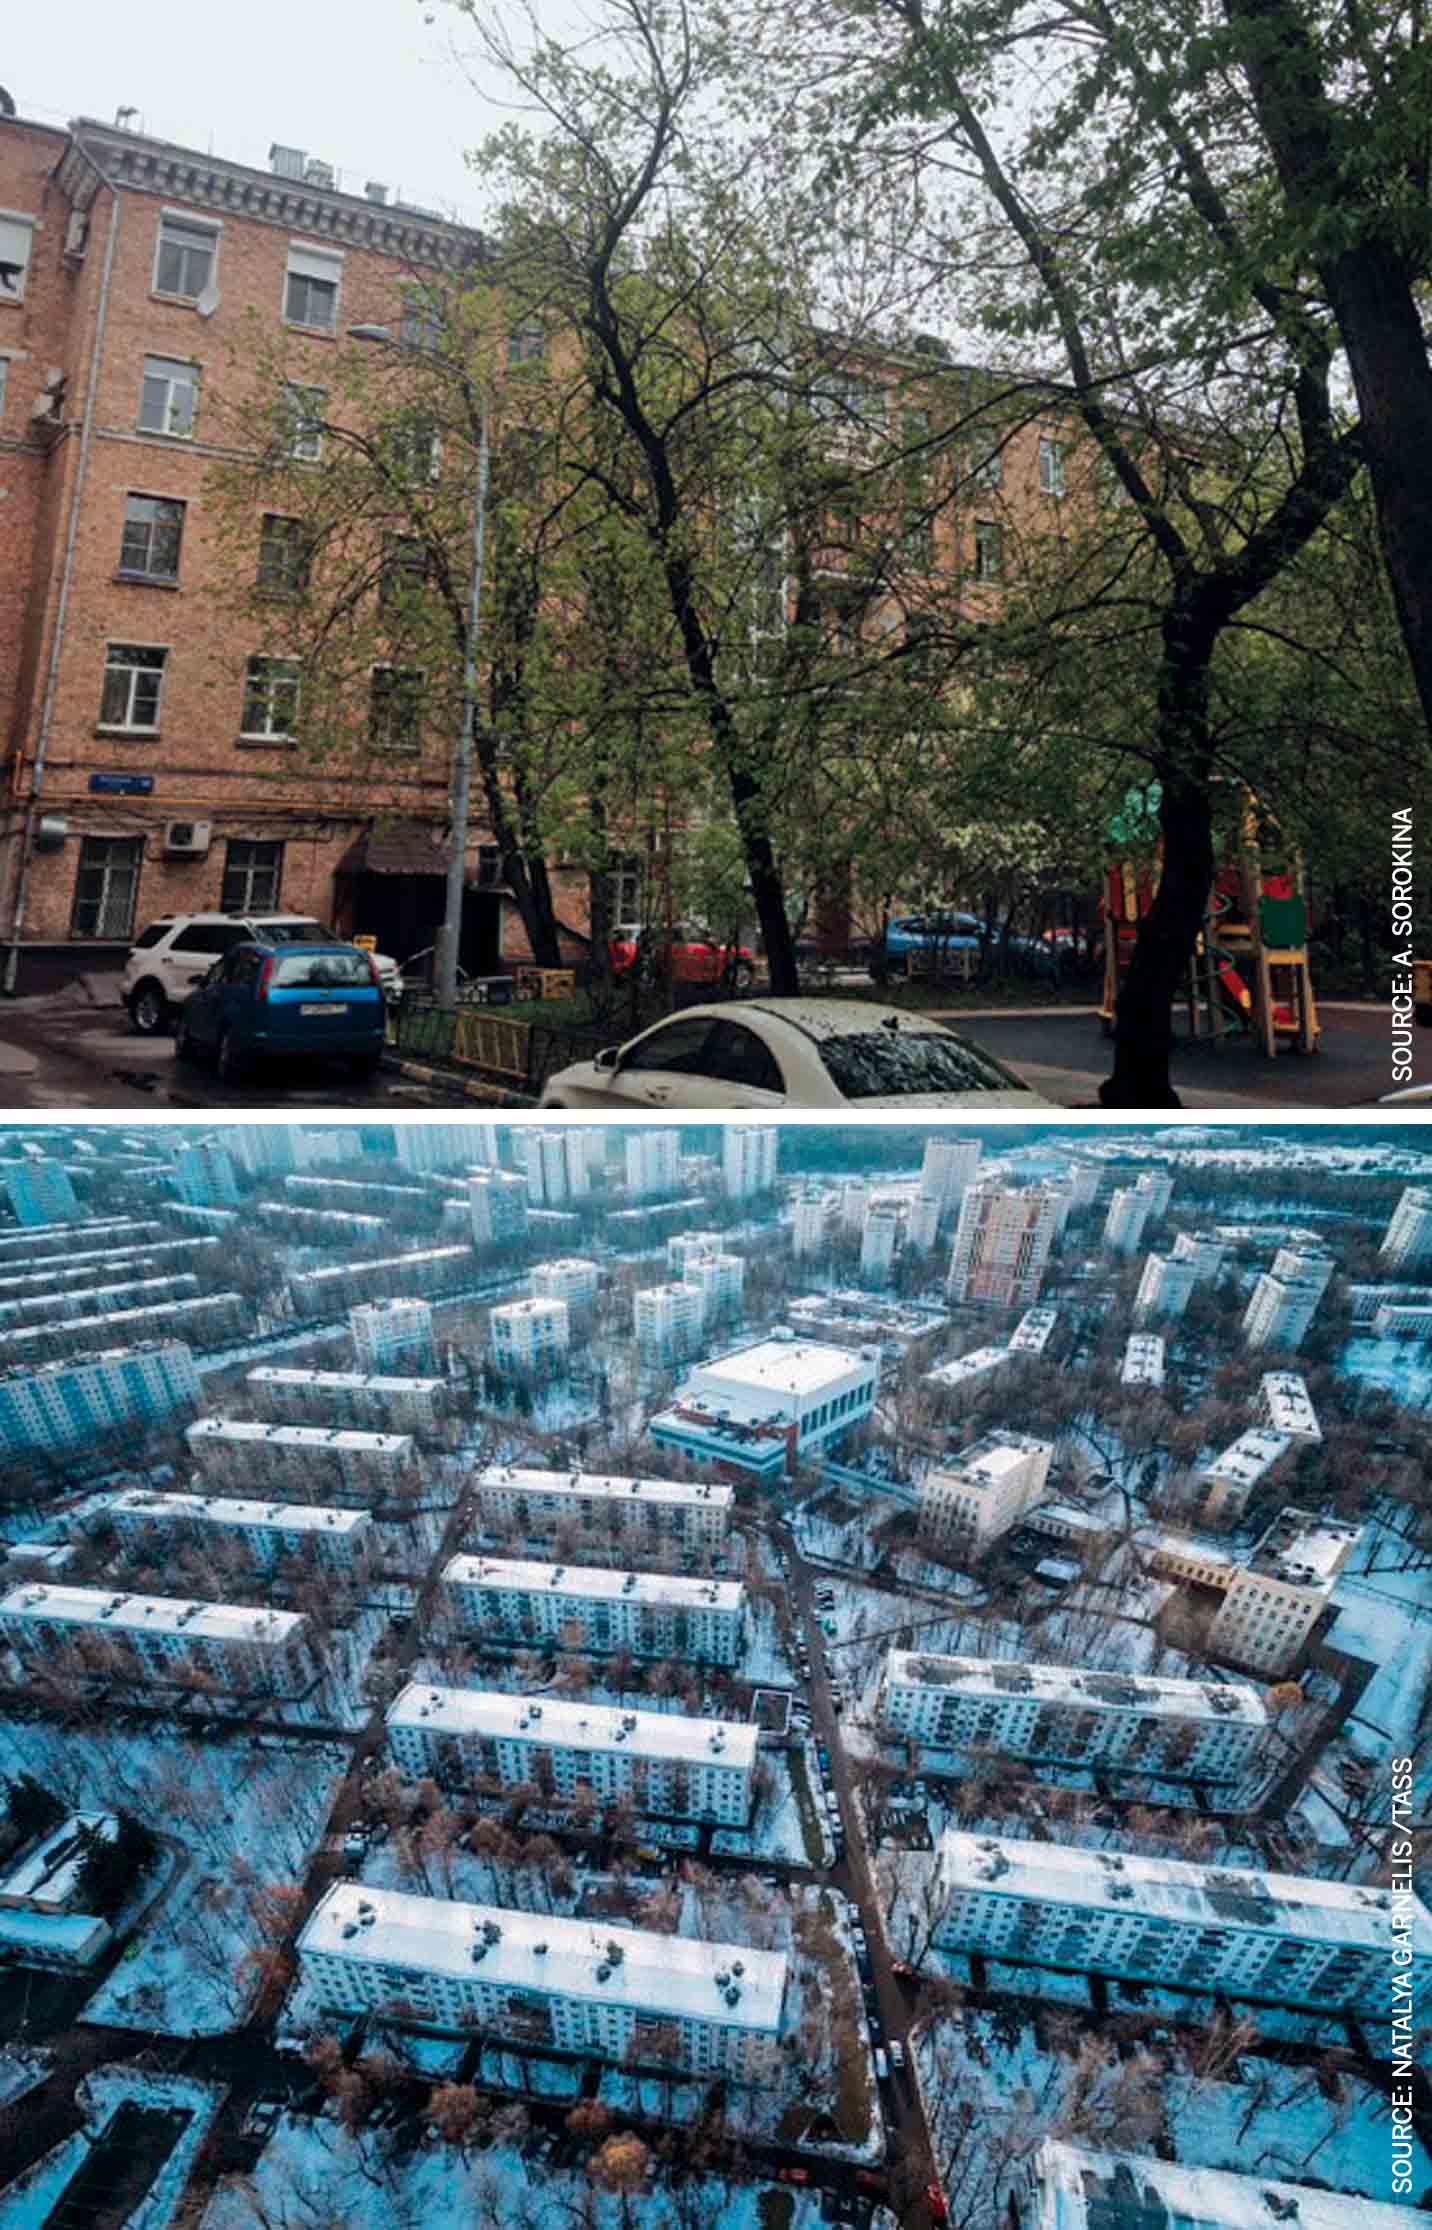 against-renovation-block-by-block-fight-neighbourhood-integrity-five-storey-building-where-anna-sorokina-resides-family-near-metro-dynamo-building-appeared-demolished-list-may-1-aerial-view-moscow-micro-rayon